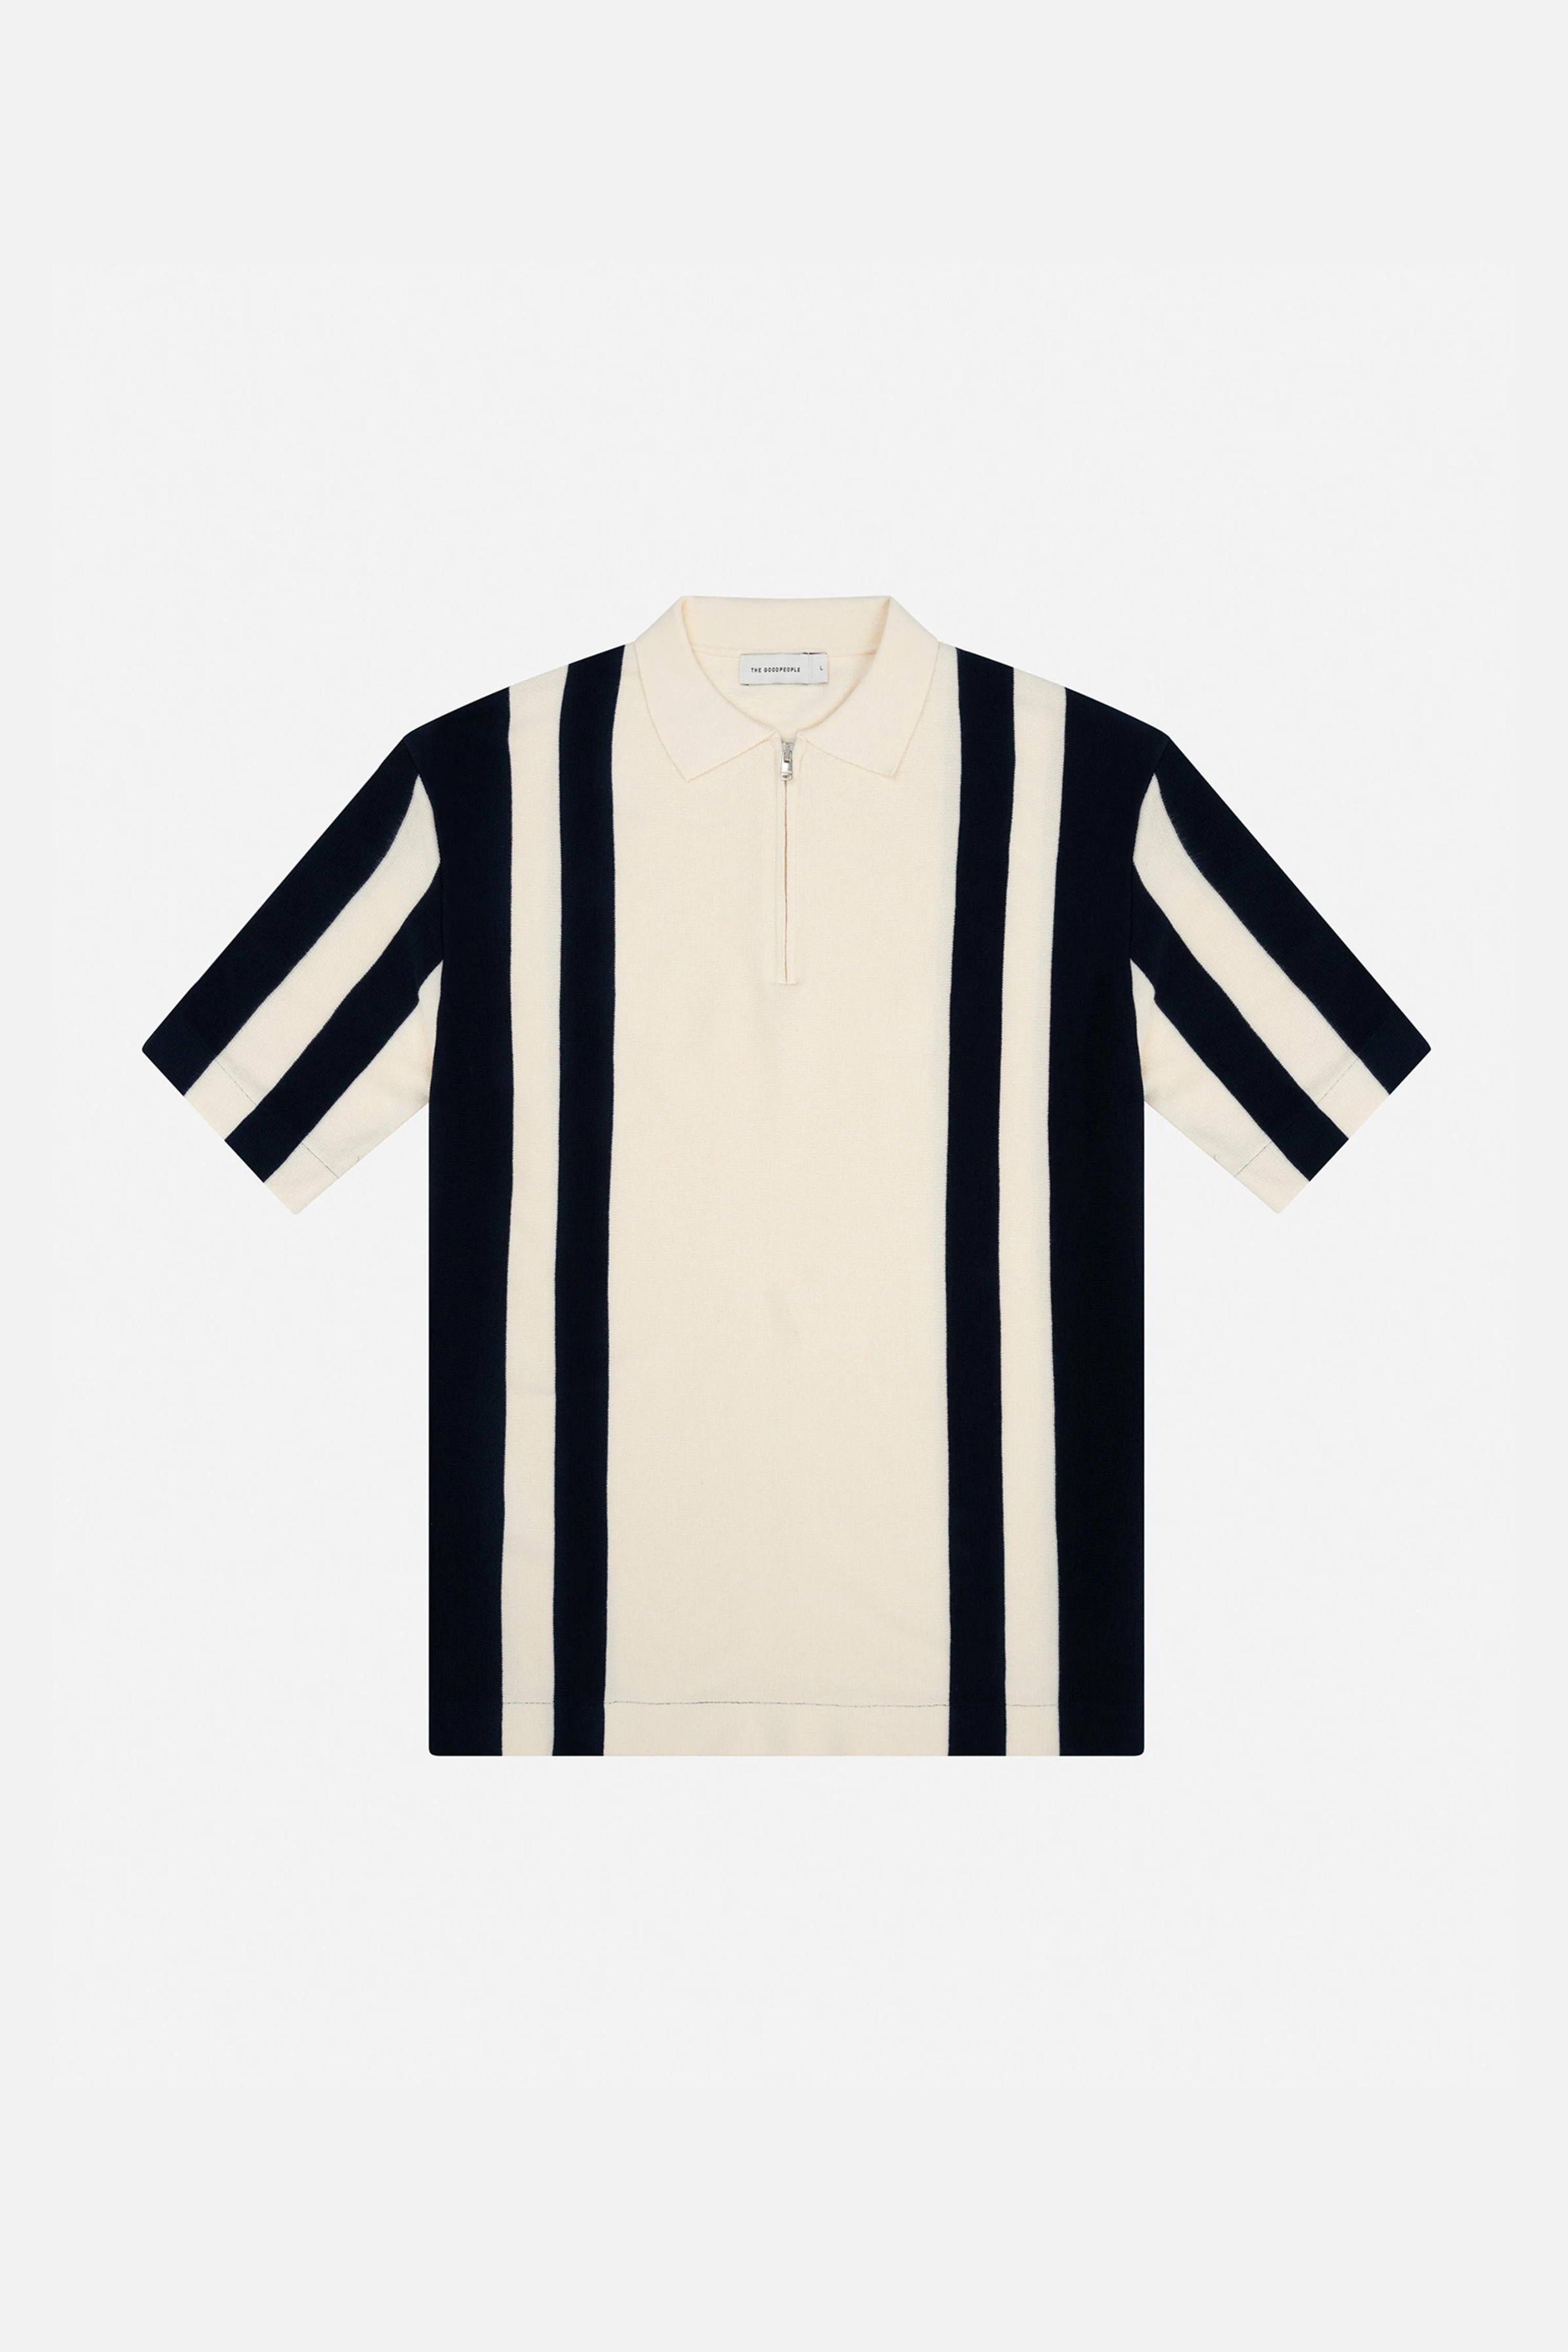 PALUDE KNIT - WHITE/NAVY